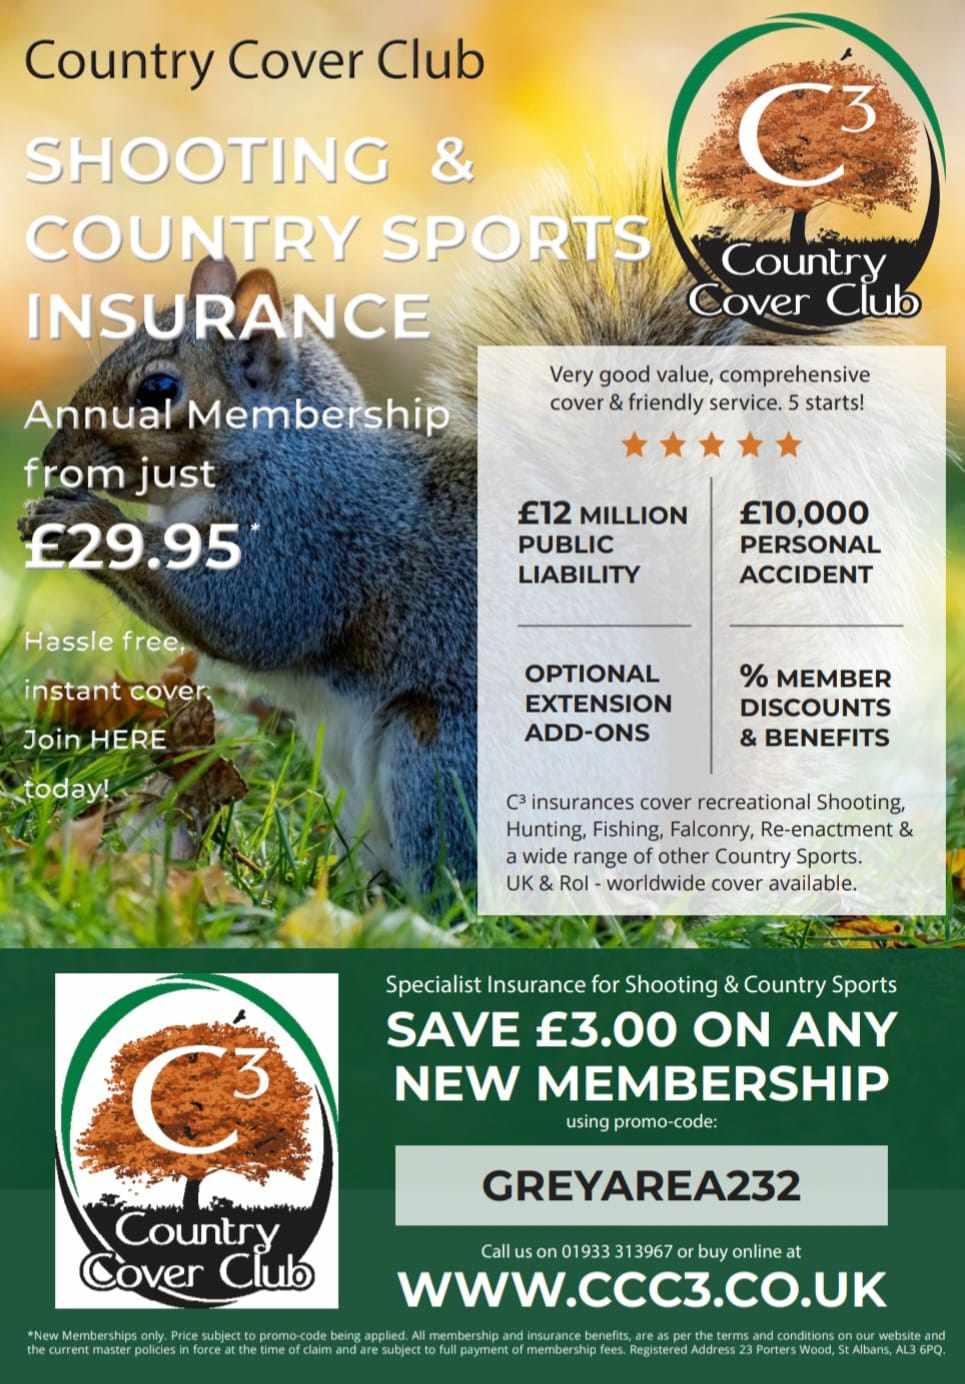 How Insurance can protect the Hunting or Fishing Club